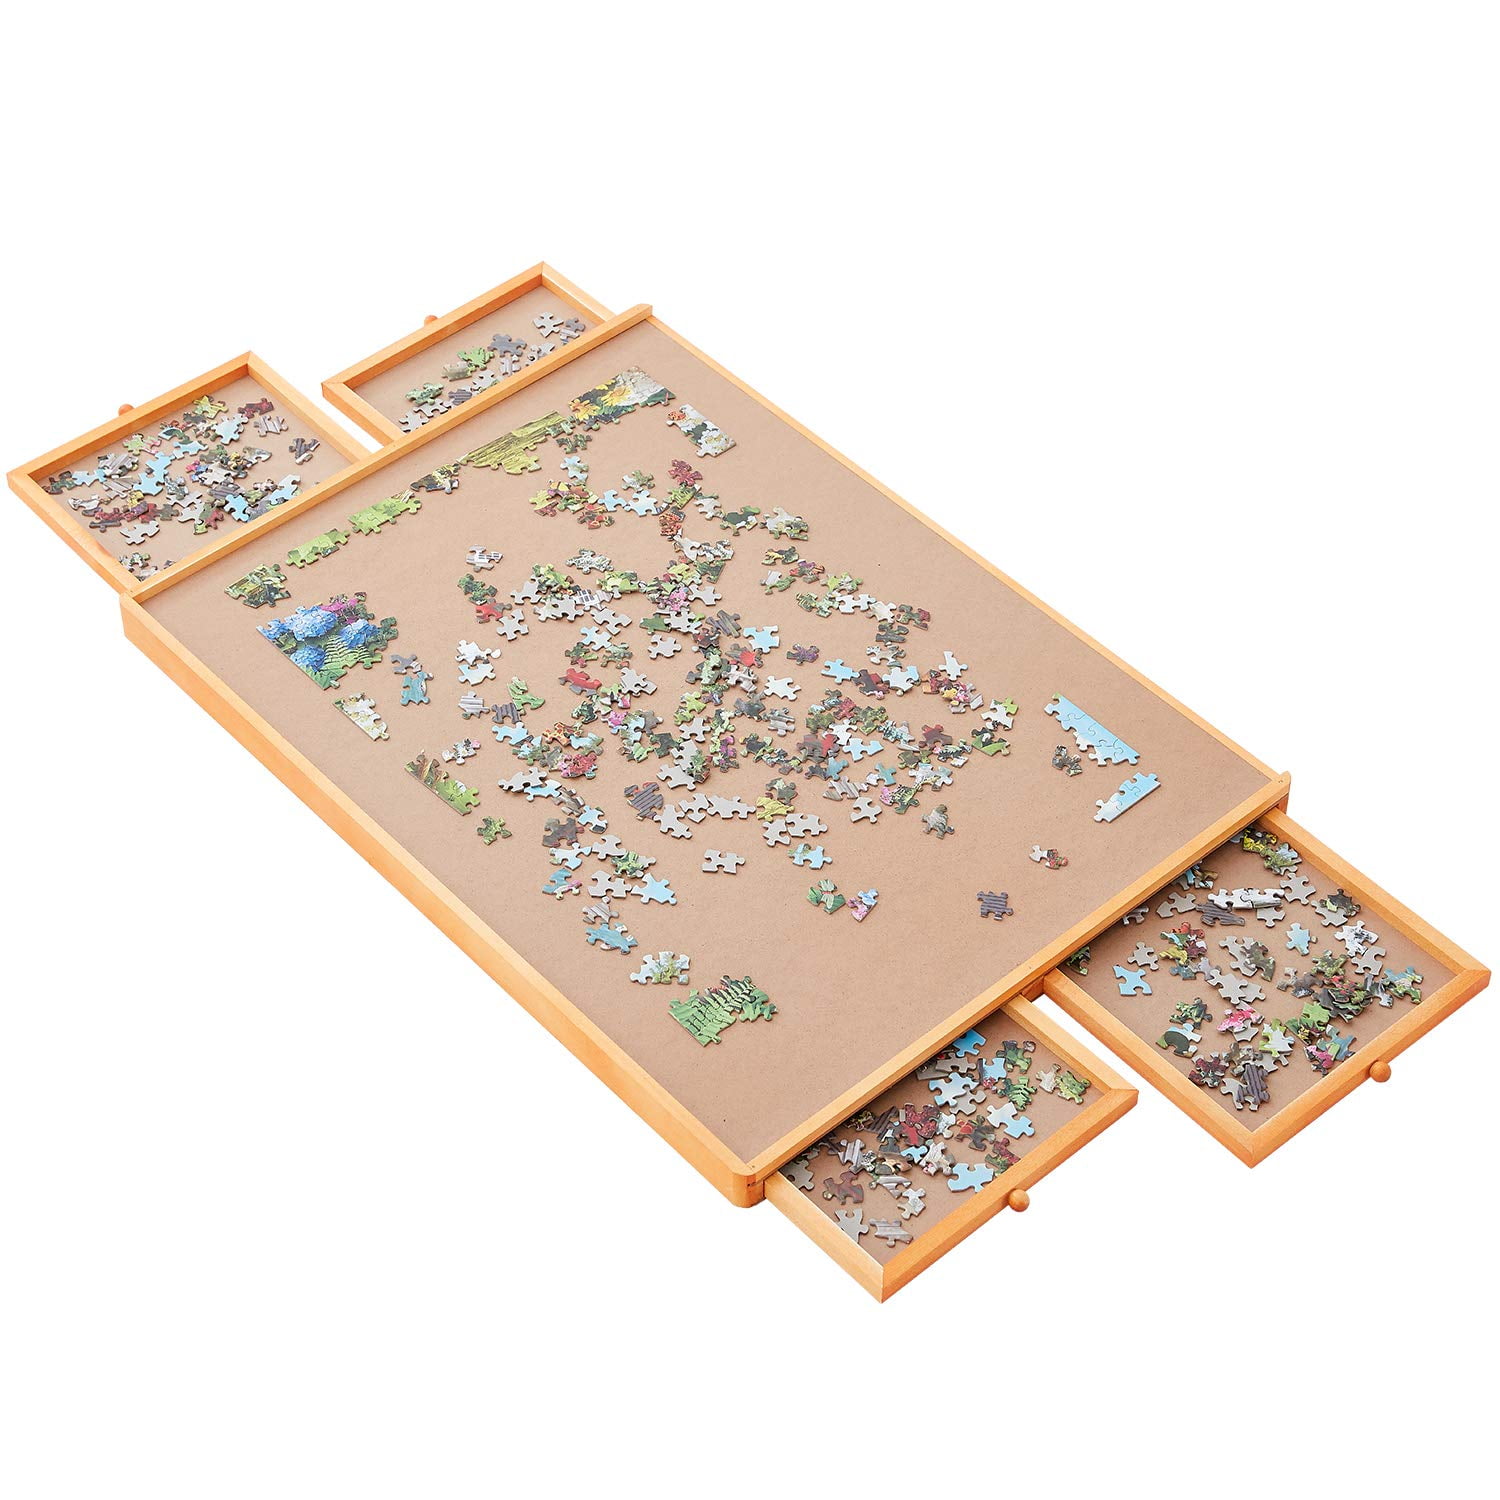 Puzzle Tables for Adults Jigsaw Puzzle Table Puzzle Tray Jumbo Size: 34×26 for Maximum 1500 Pieces Puzzles Puzzle Table Weight: 2.0 LBS-5 KGS Puzzle Board Puzzle Boards and Storage 